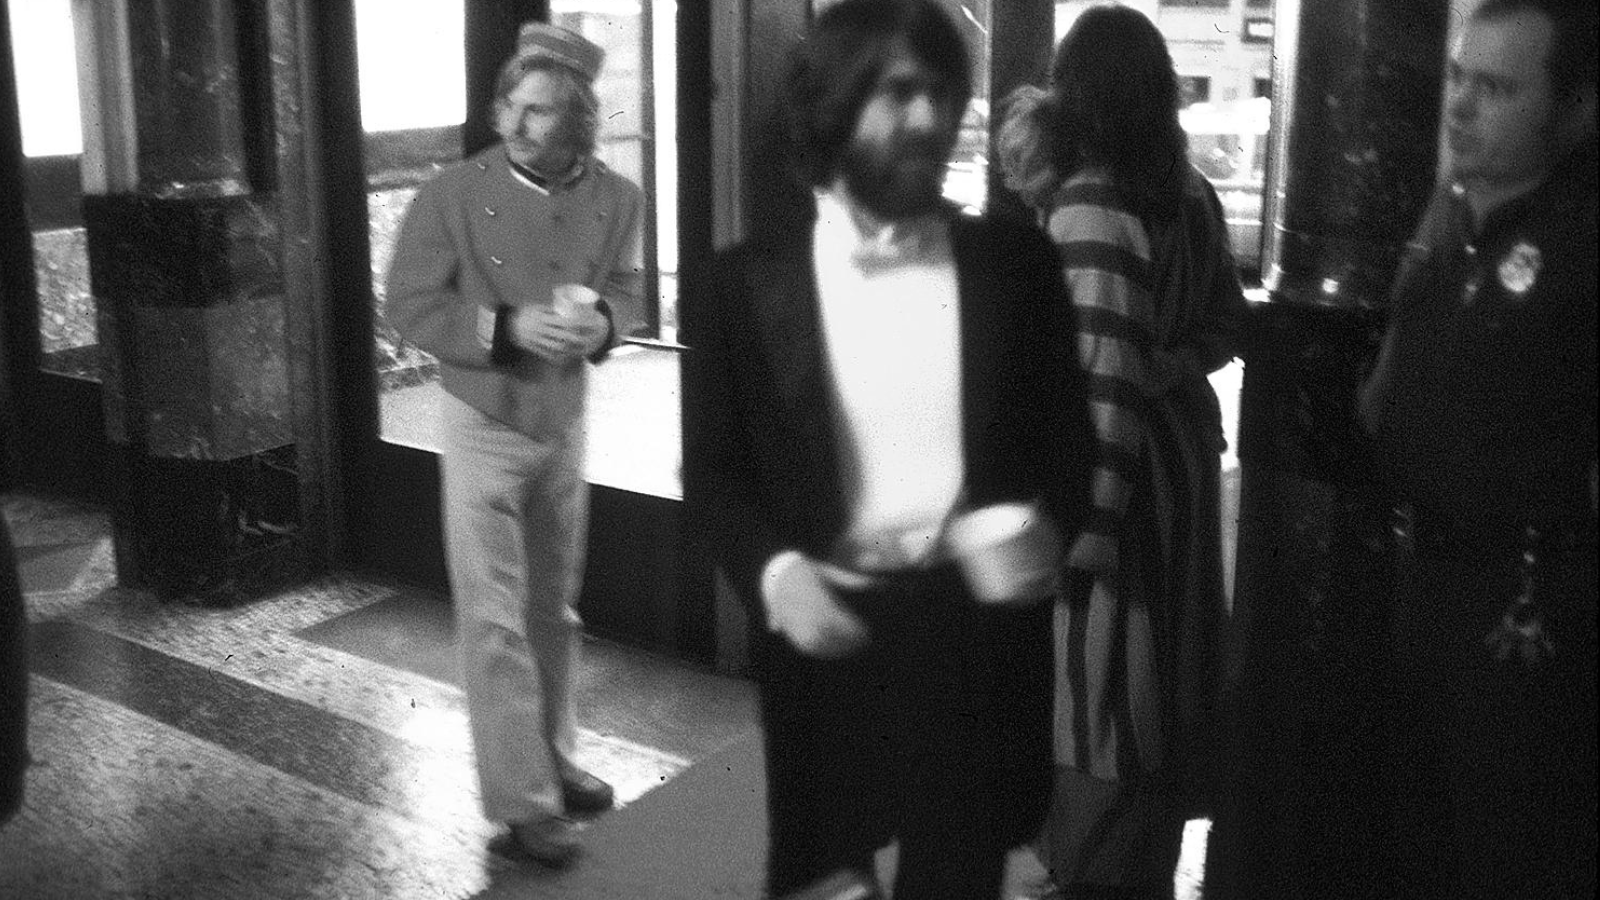 A guest, blurry but dressed to the nines, entering the Moore Egyptian